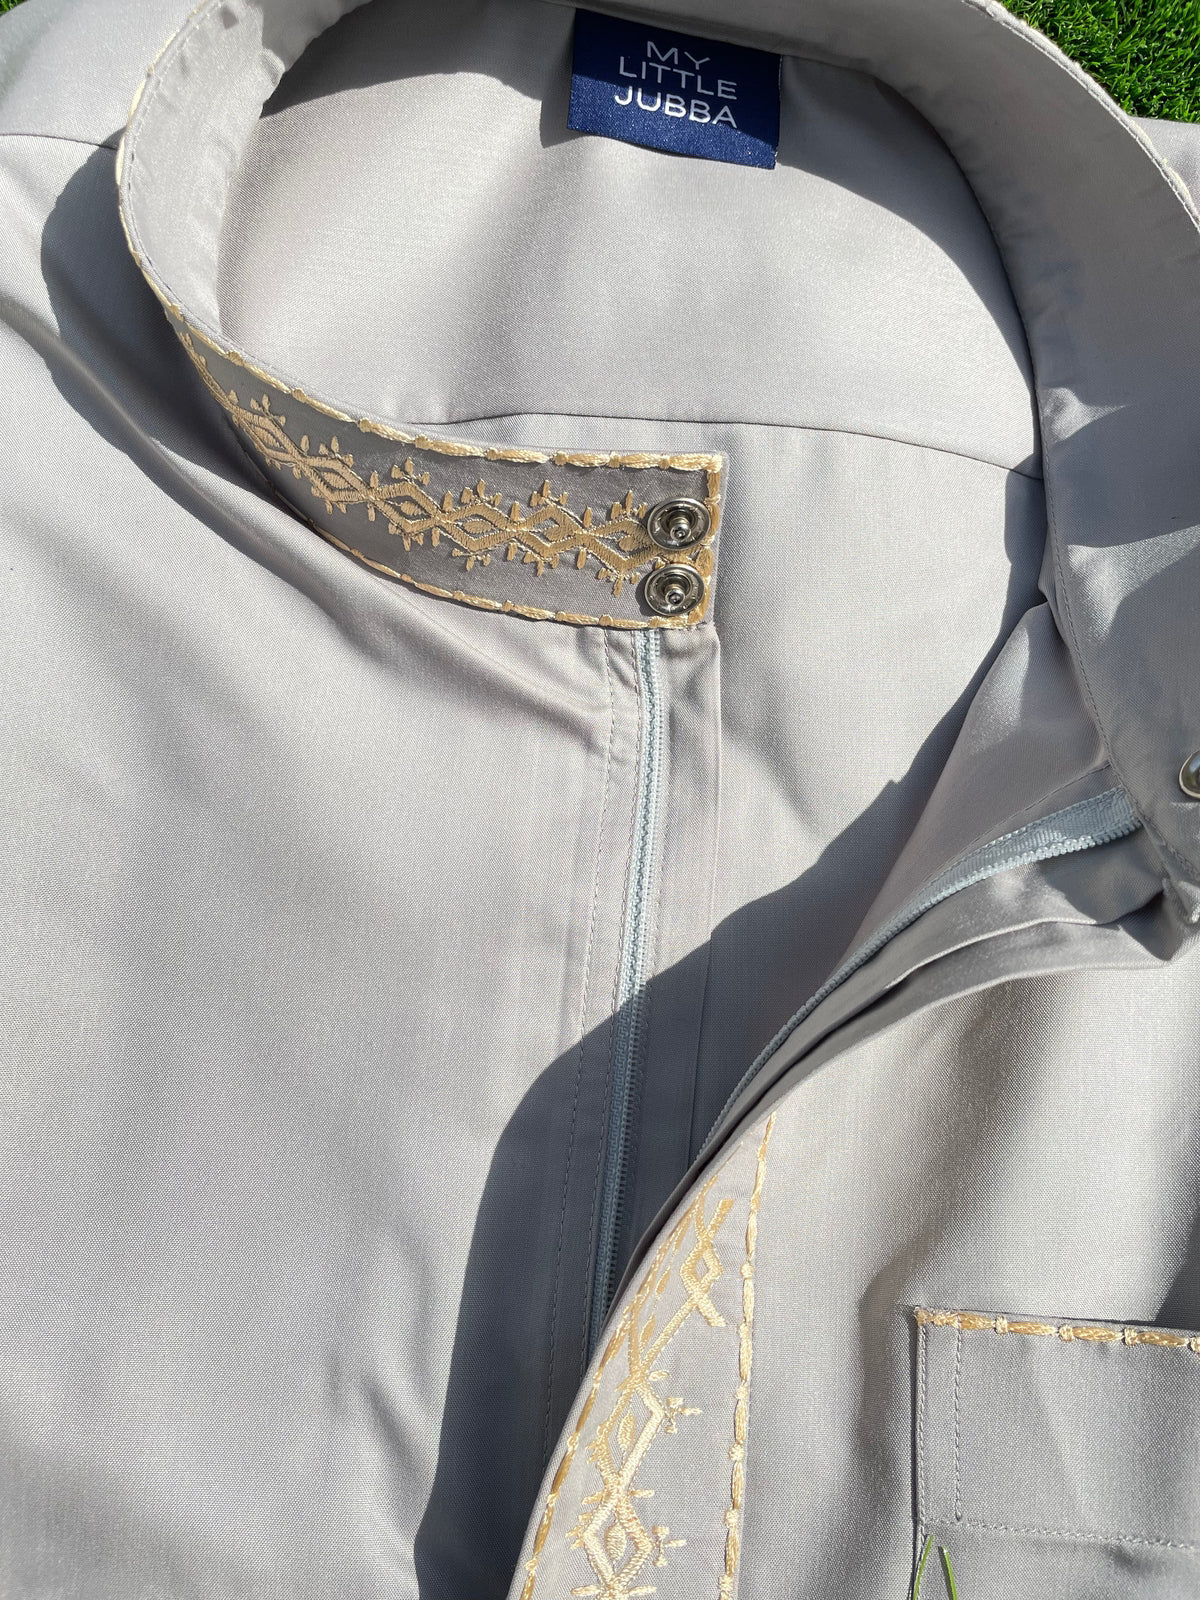 Mens Light Grey Kuwaiti Thobe with Gold Embroidery